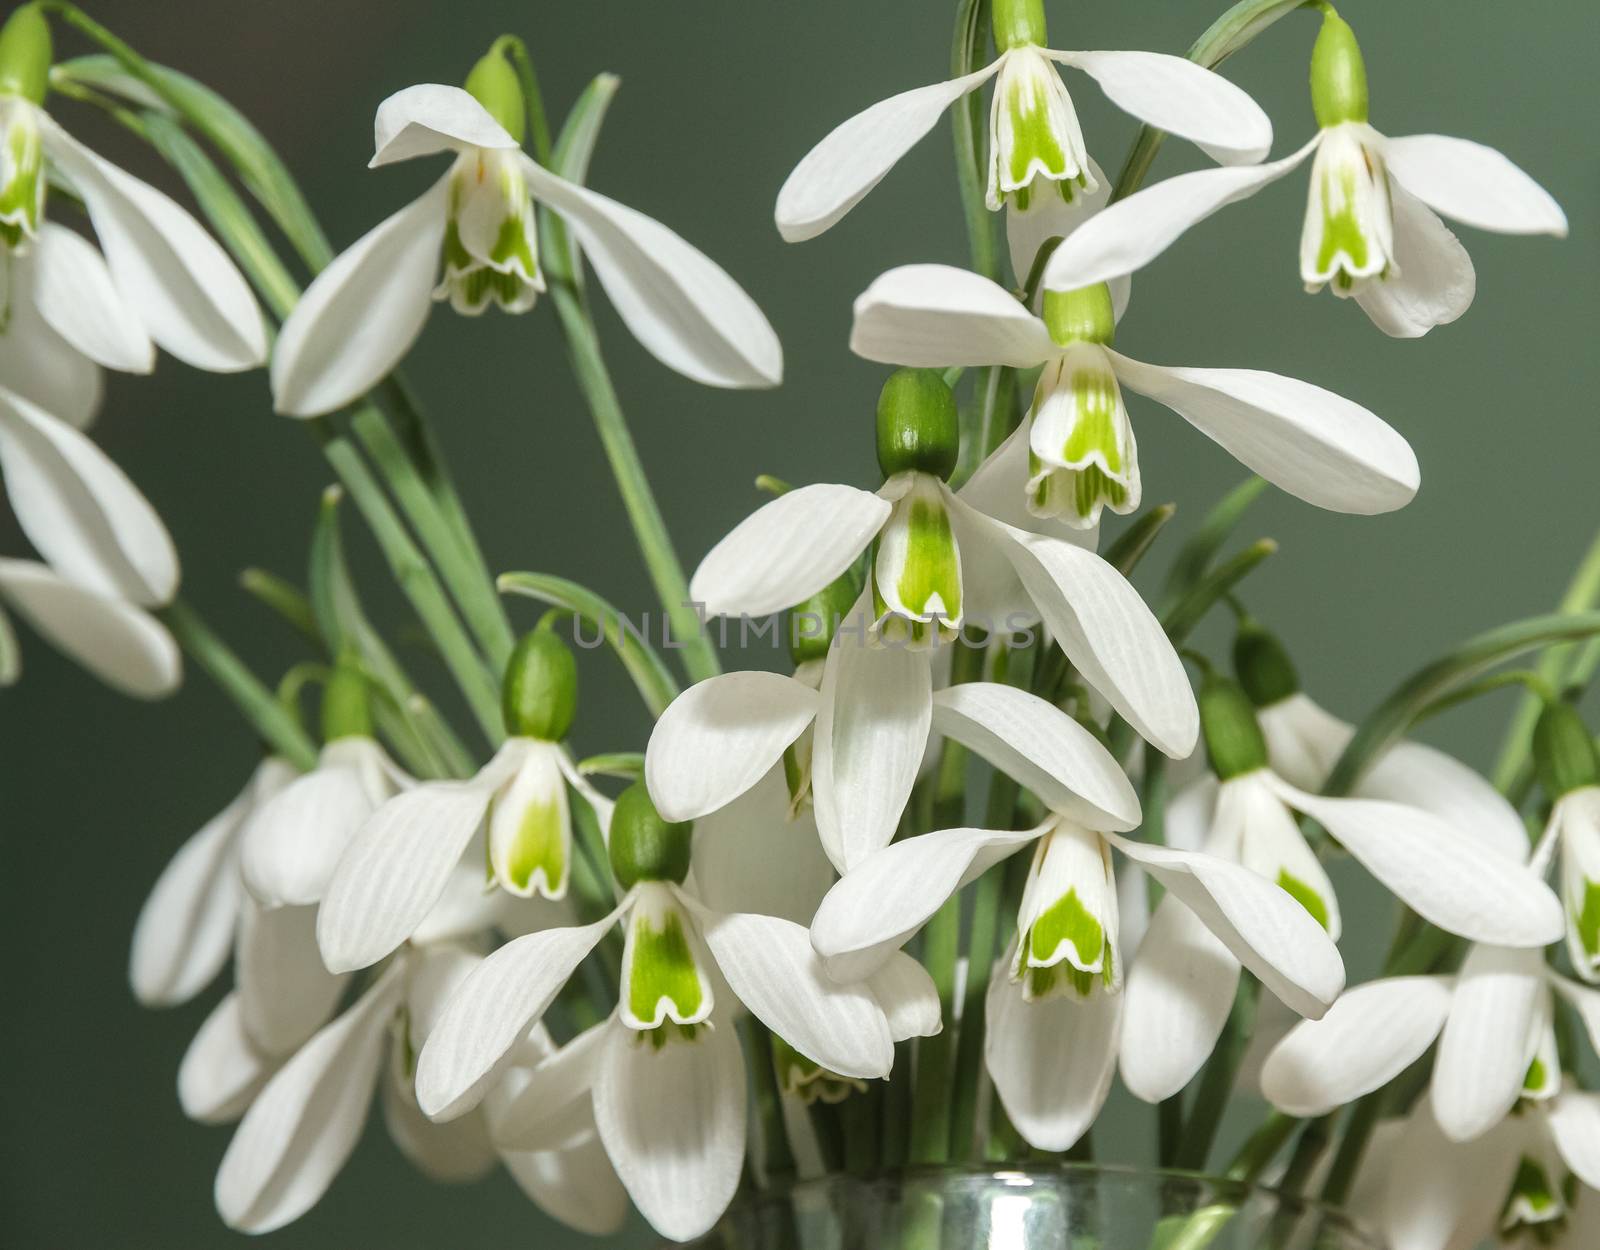 bouquet of snowdrops in a glass vase on a green background